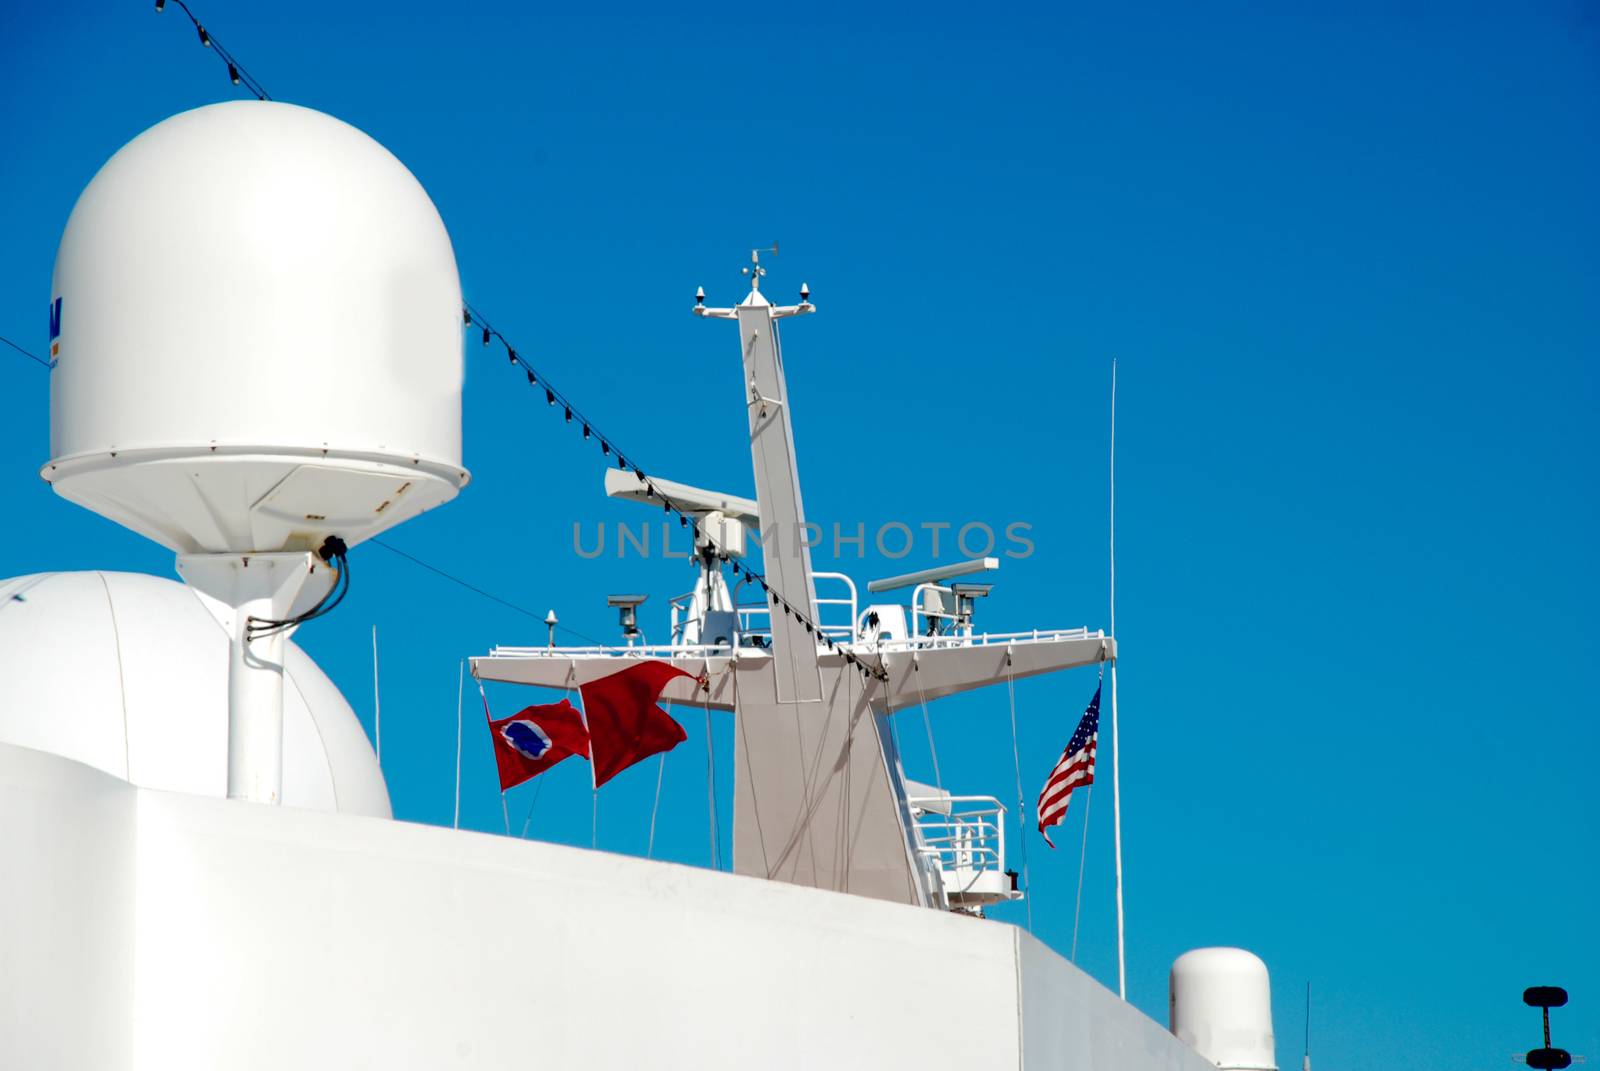 stock pictures of antennas used for telecommunications on a cruise ship
